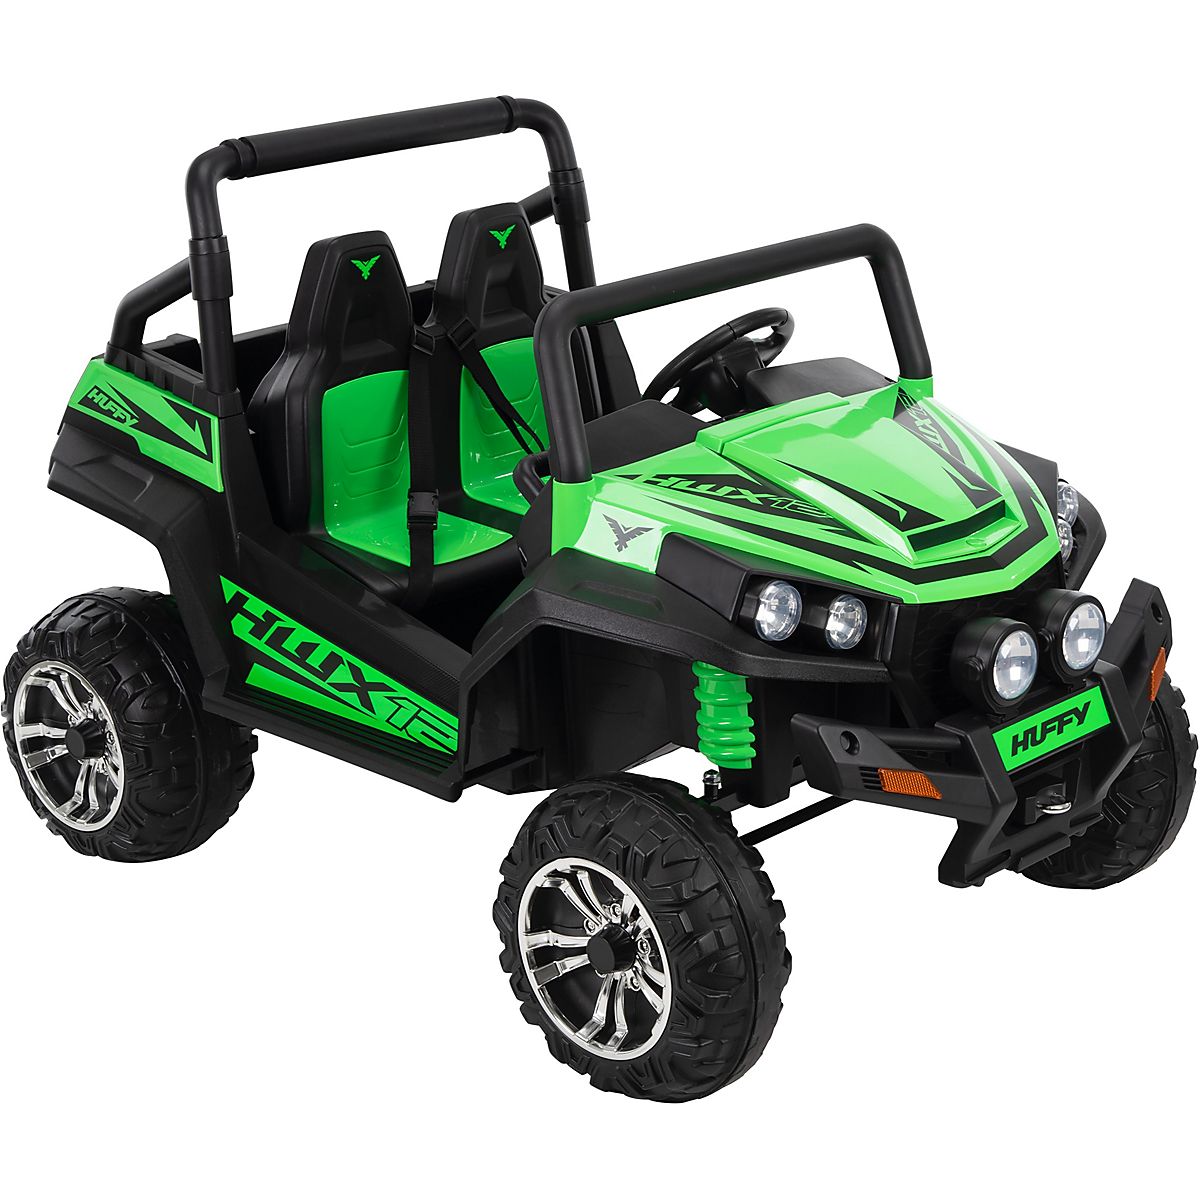 Huffy 12V HWX 12 Ride-On | Free Shipping at Academy